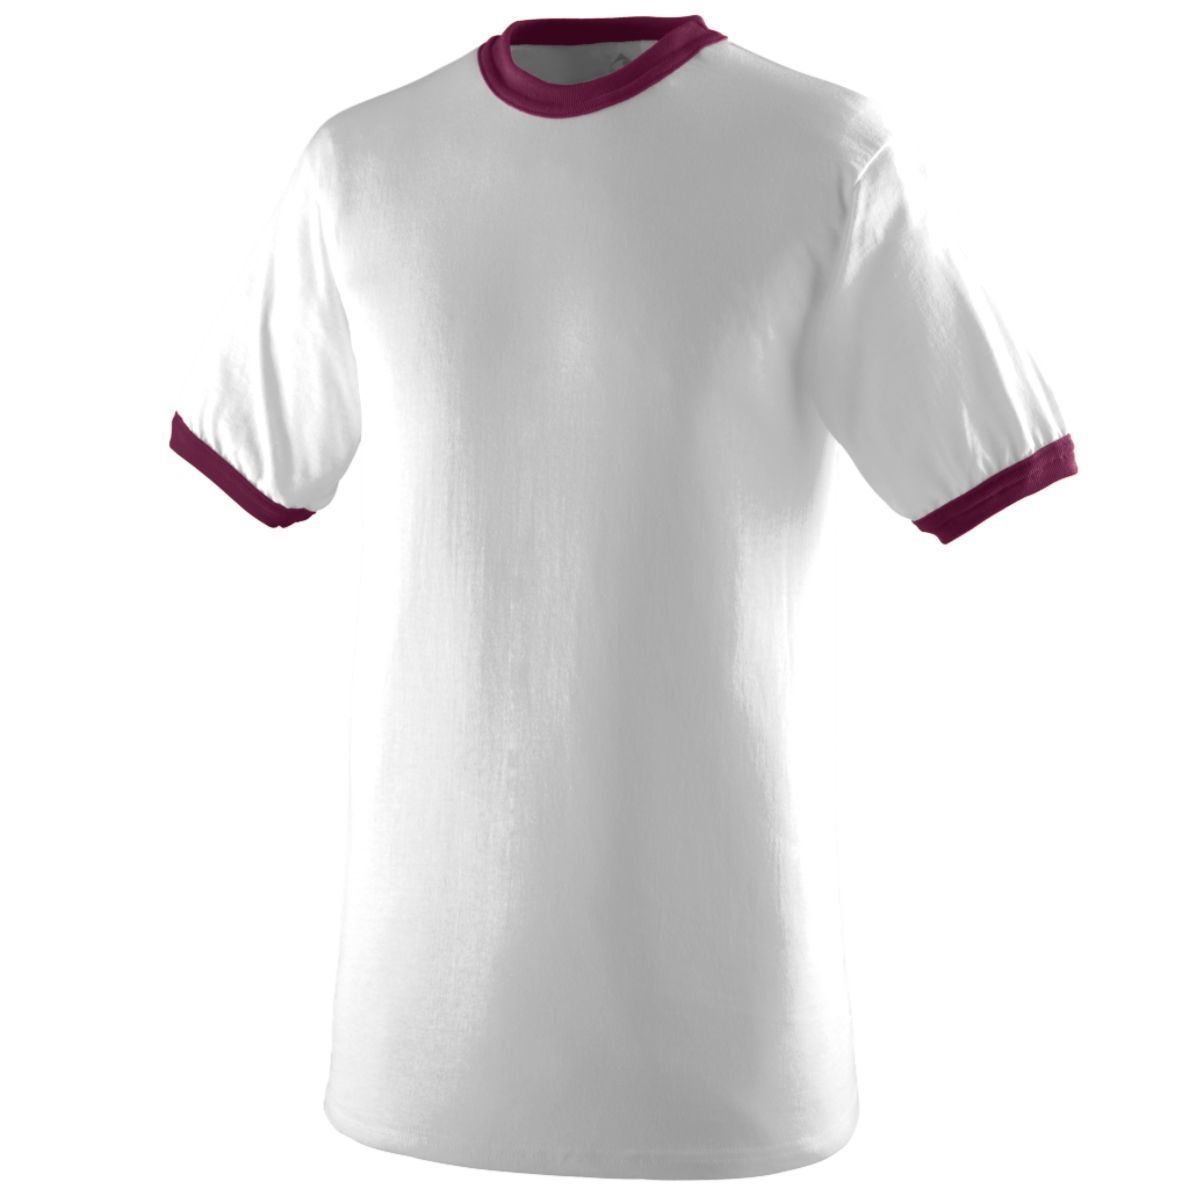 Augusta Sportswear Youth-Ringer T-Shirt in White/Maroon  -Part of the Youth, Youth-Tee-Shirt, T-Shirts, Augusta-Products, Soccer, Shirts, All-Sports-1 product lines at KanaleyCreations.com